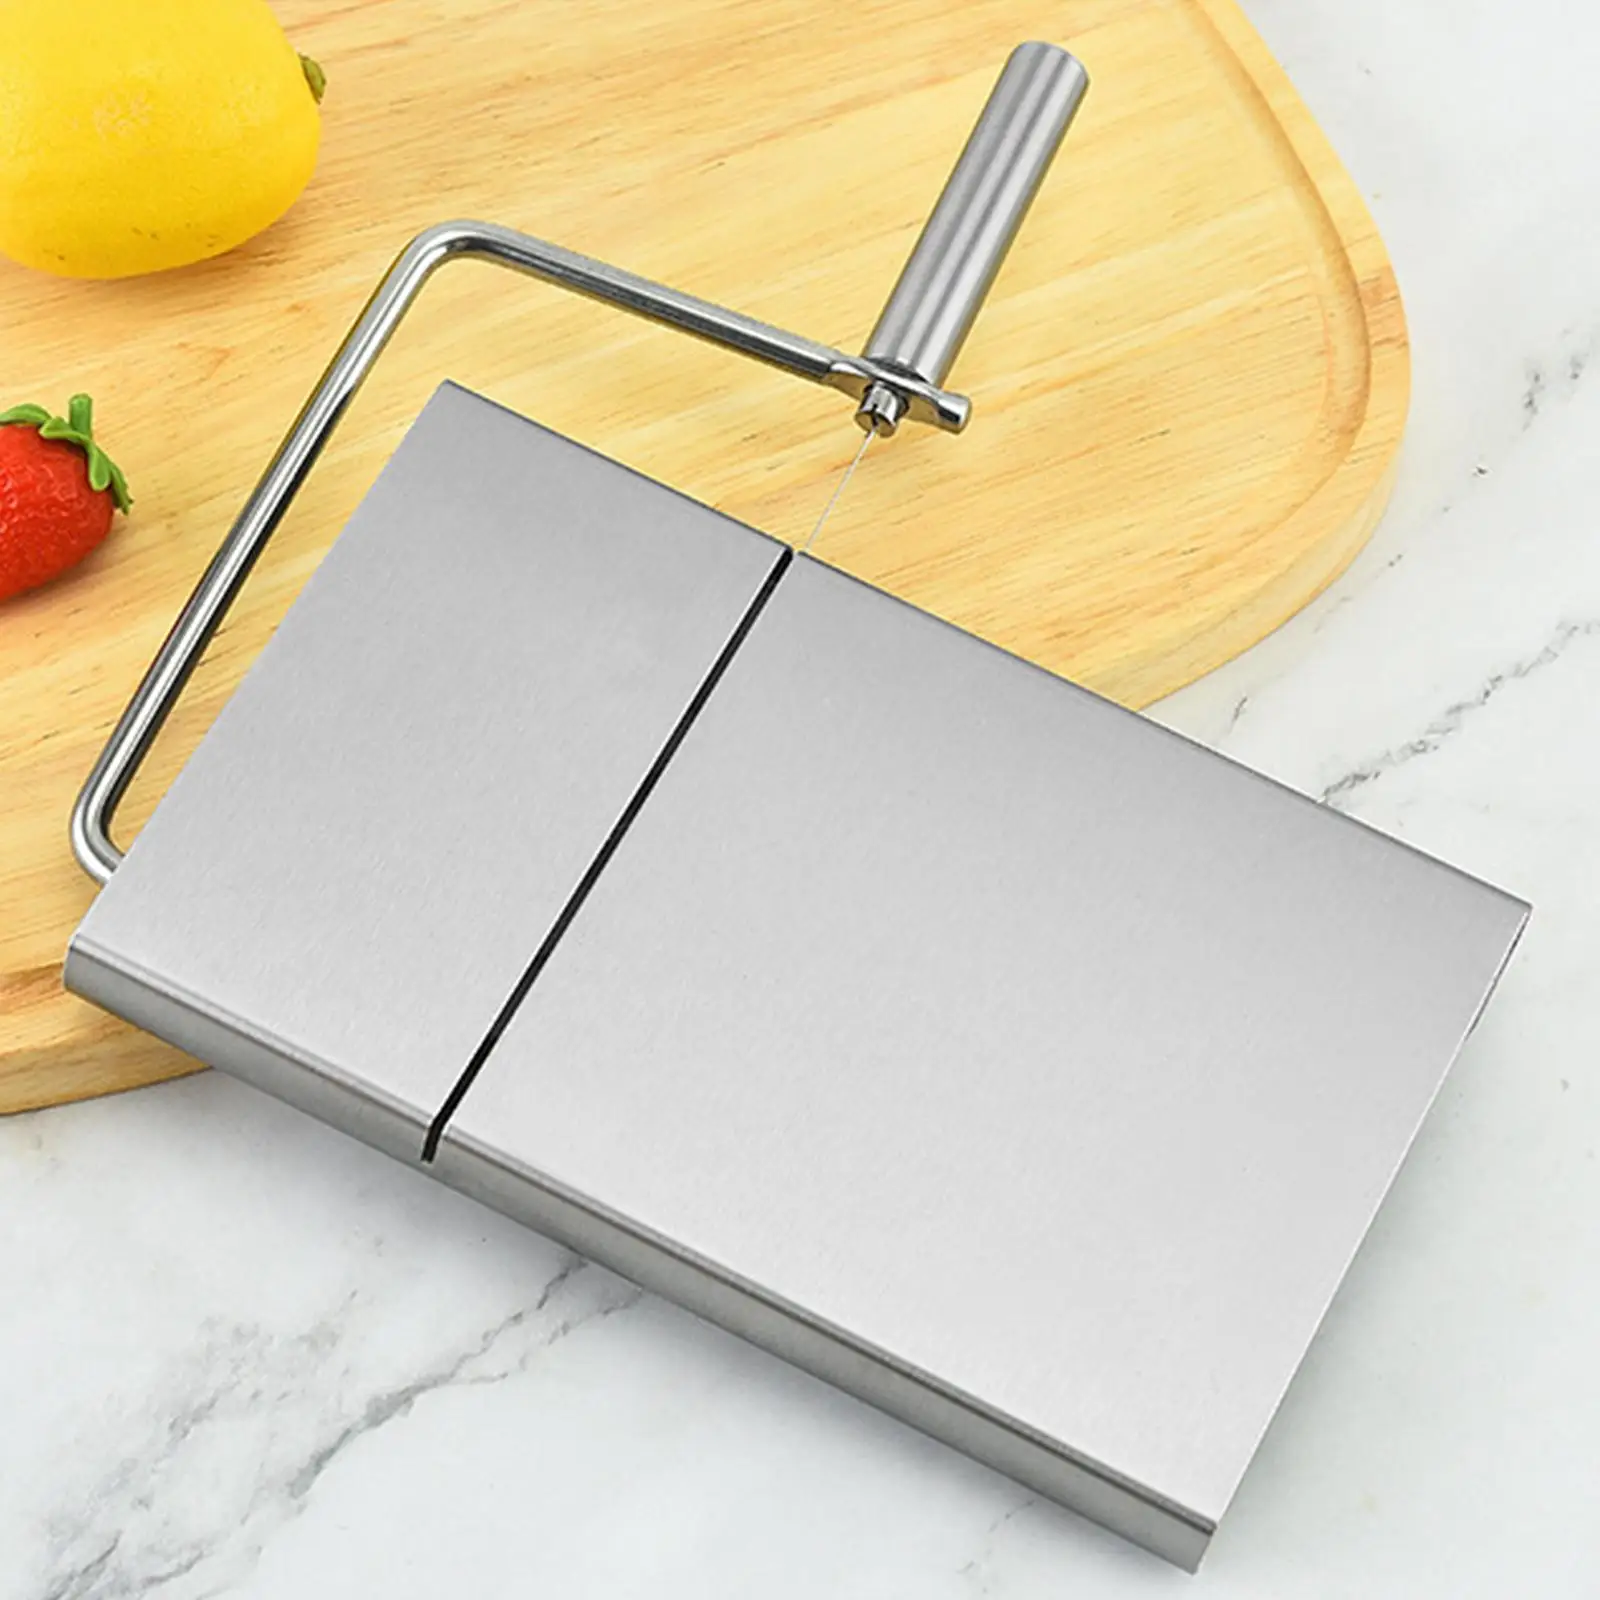 Cheese Cutter, Cheese Block , Kitchen Accessories Cake Blade Heavy Duty Stainless Steel Cheese , Cheese Cutting Board, for Cafe